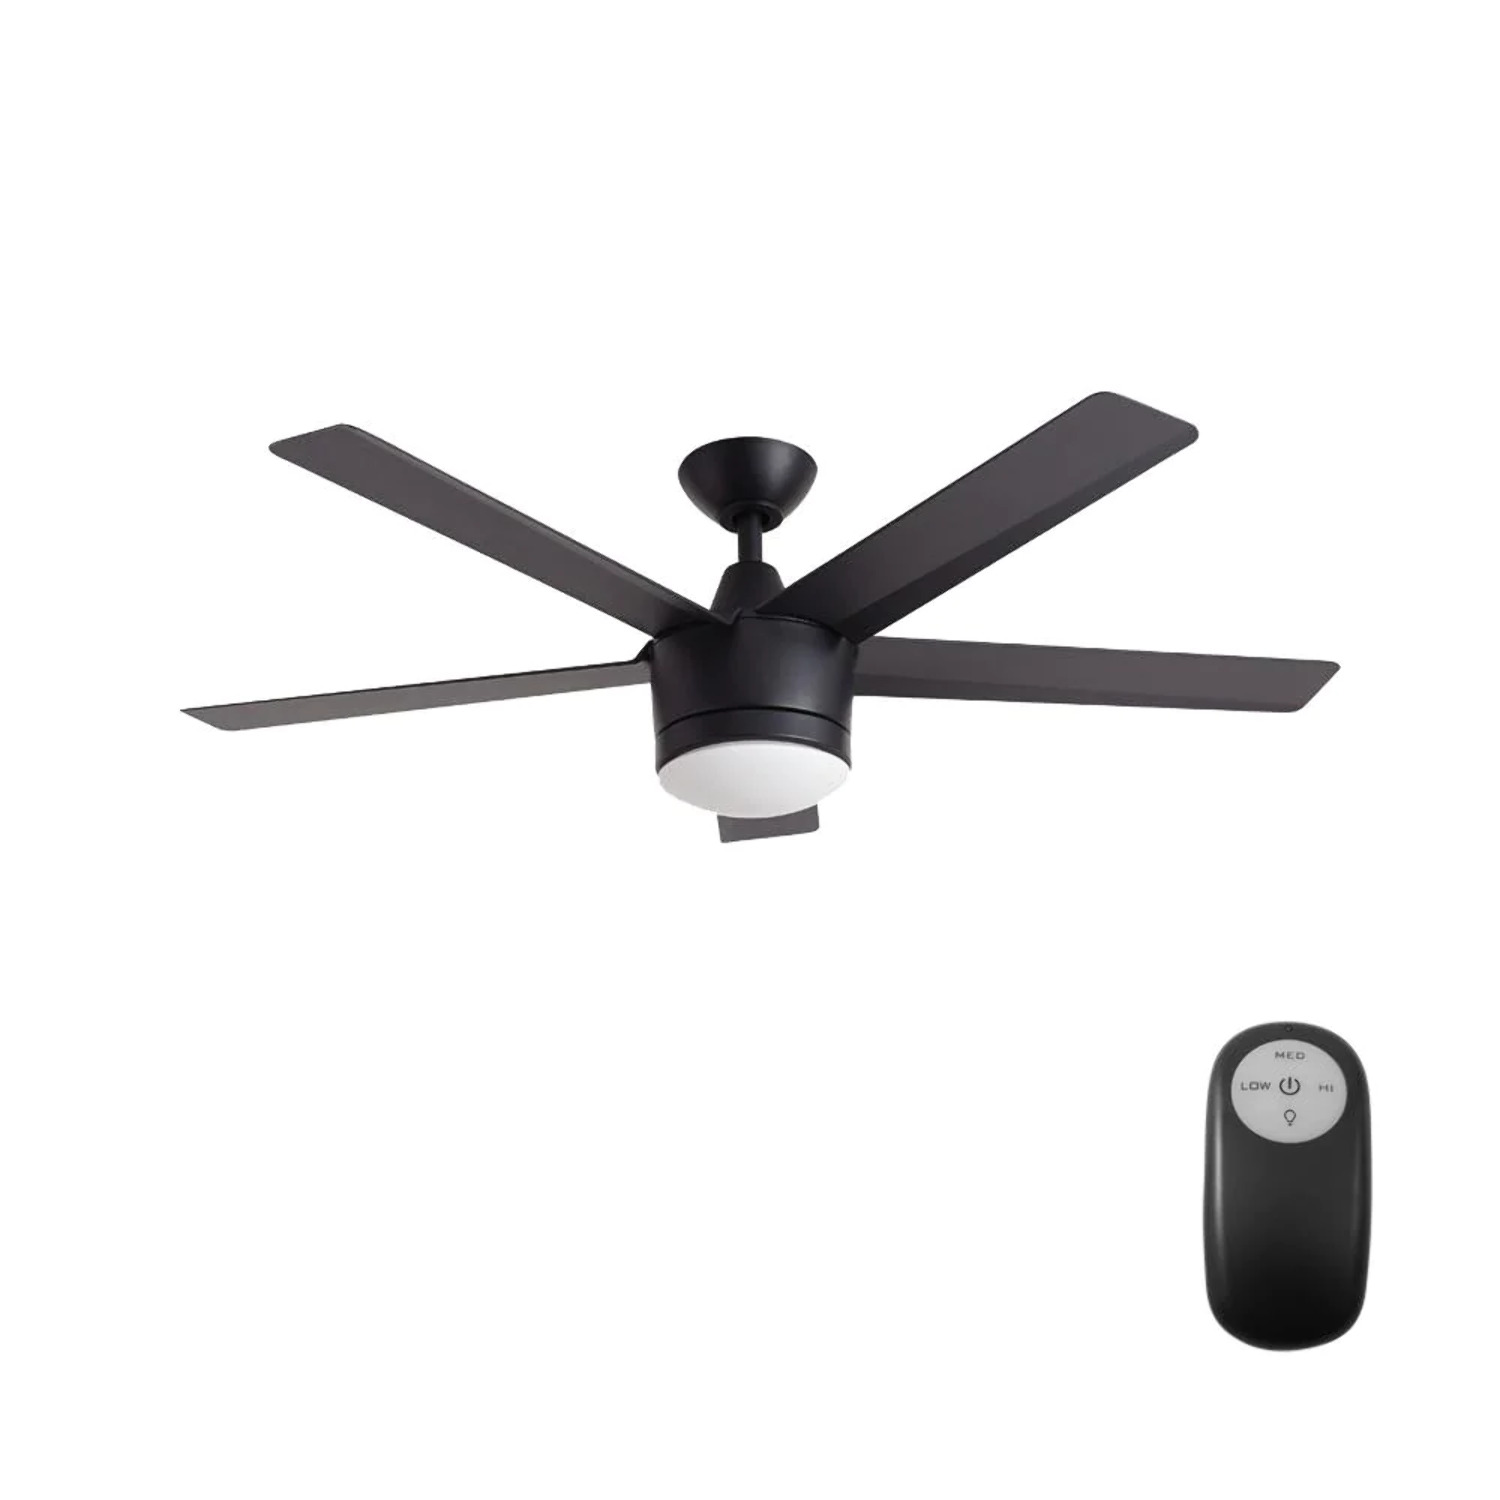 Home Decorators Merwry 52 Inches Integrated LED Indoor Matte Remote Control Ceiling Fan Matte Black - image 1 of 2